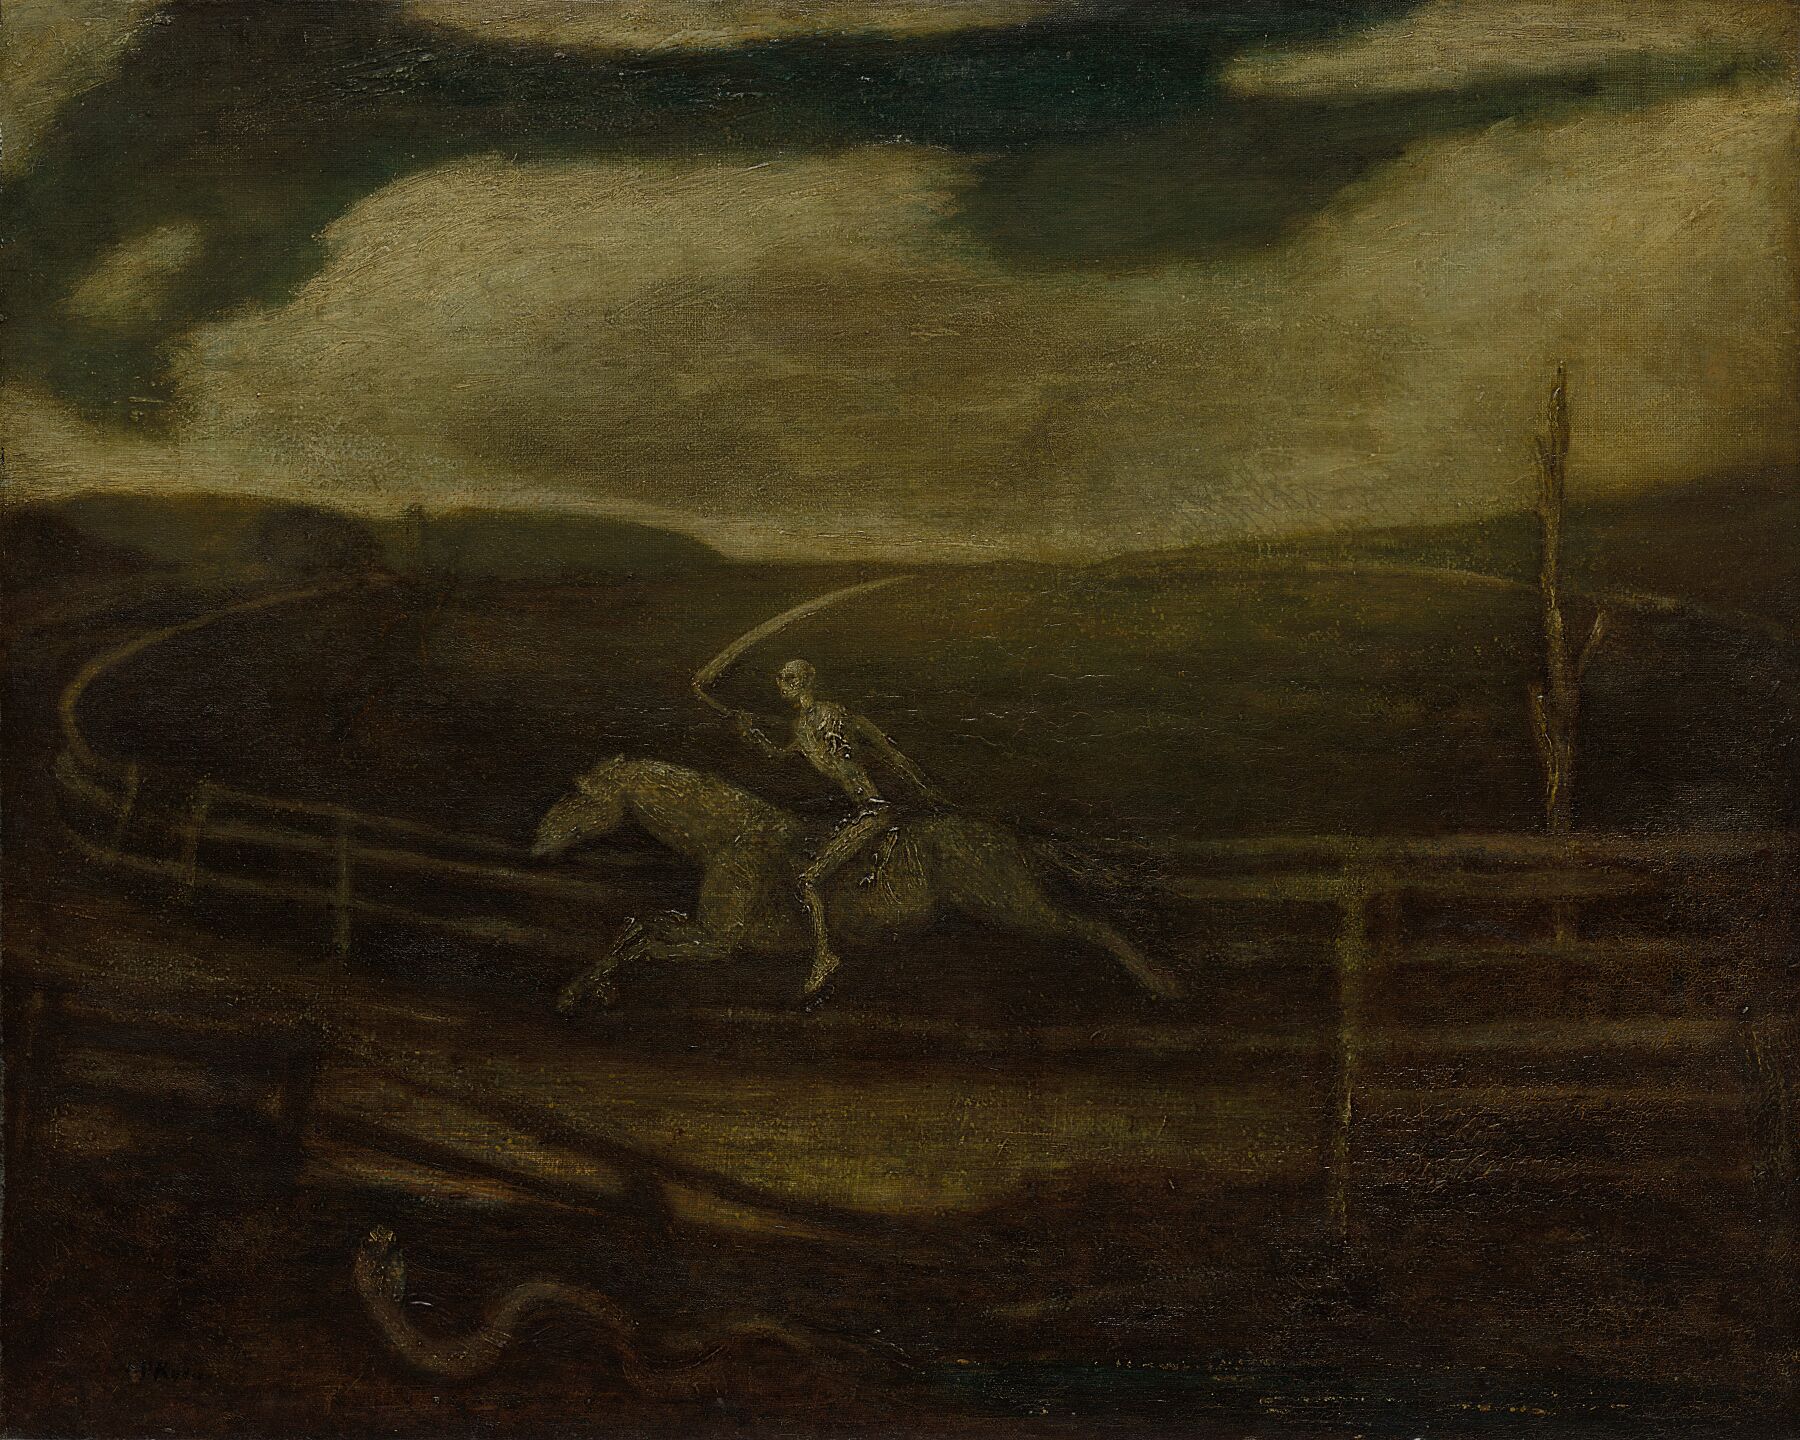 The Race Track (Death on a Pale Horse) by Albert Pinkham Ryder - c. 1896–1908